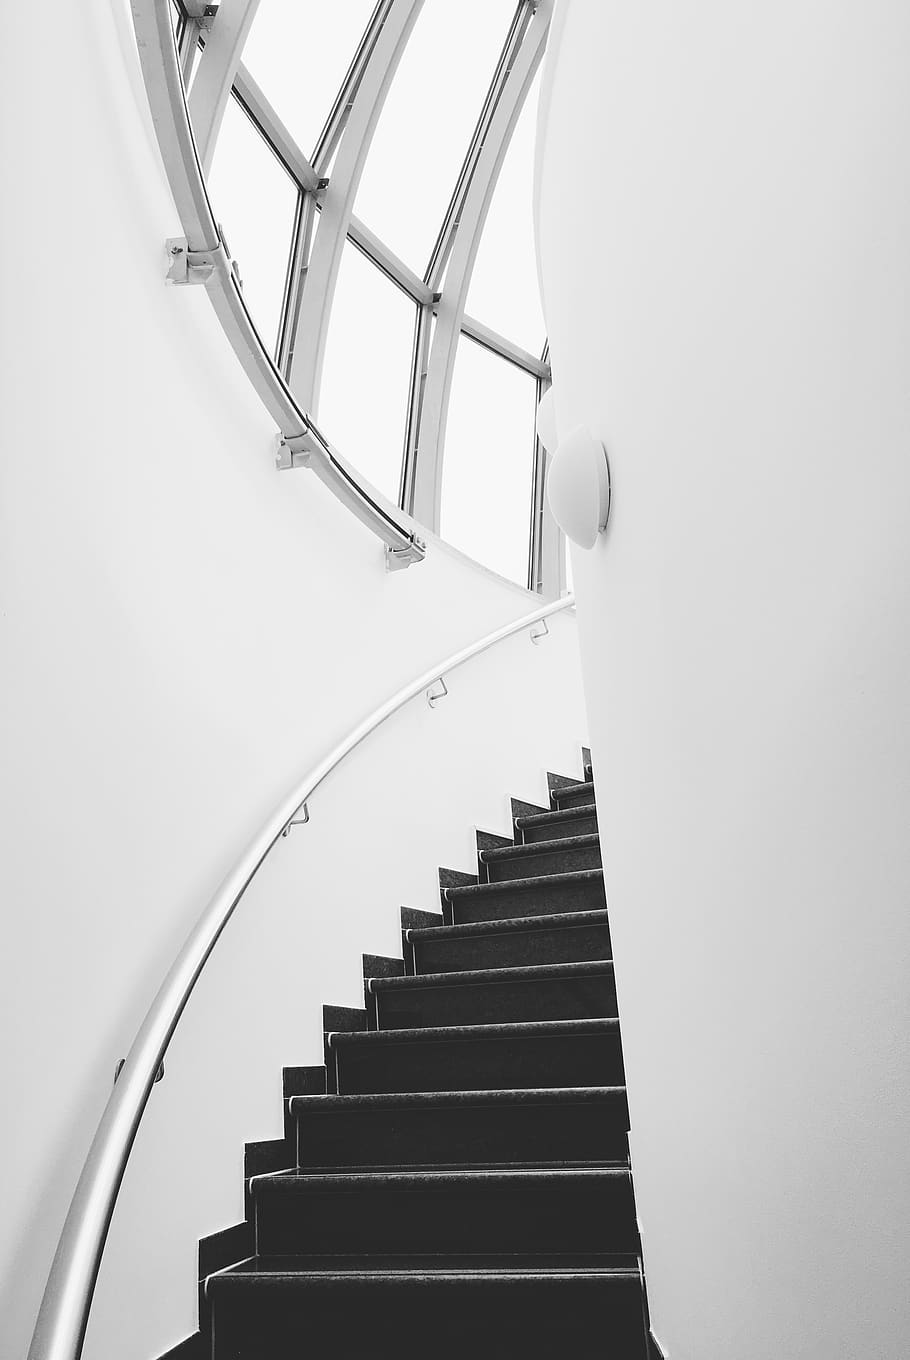 photo of stairway during daytime, staircase, handrail, banister, HD wallpaper